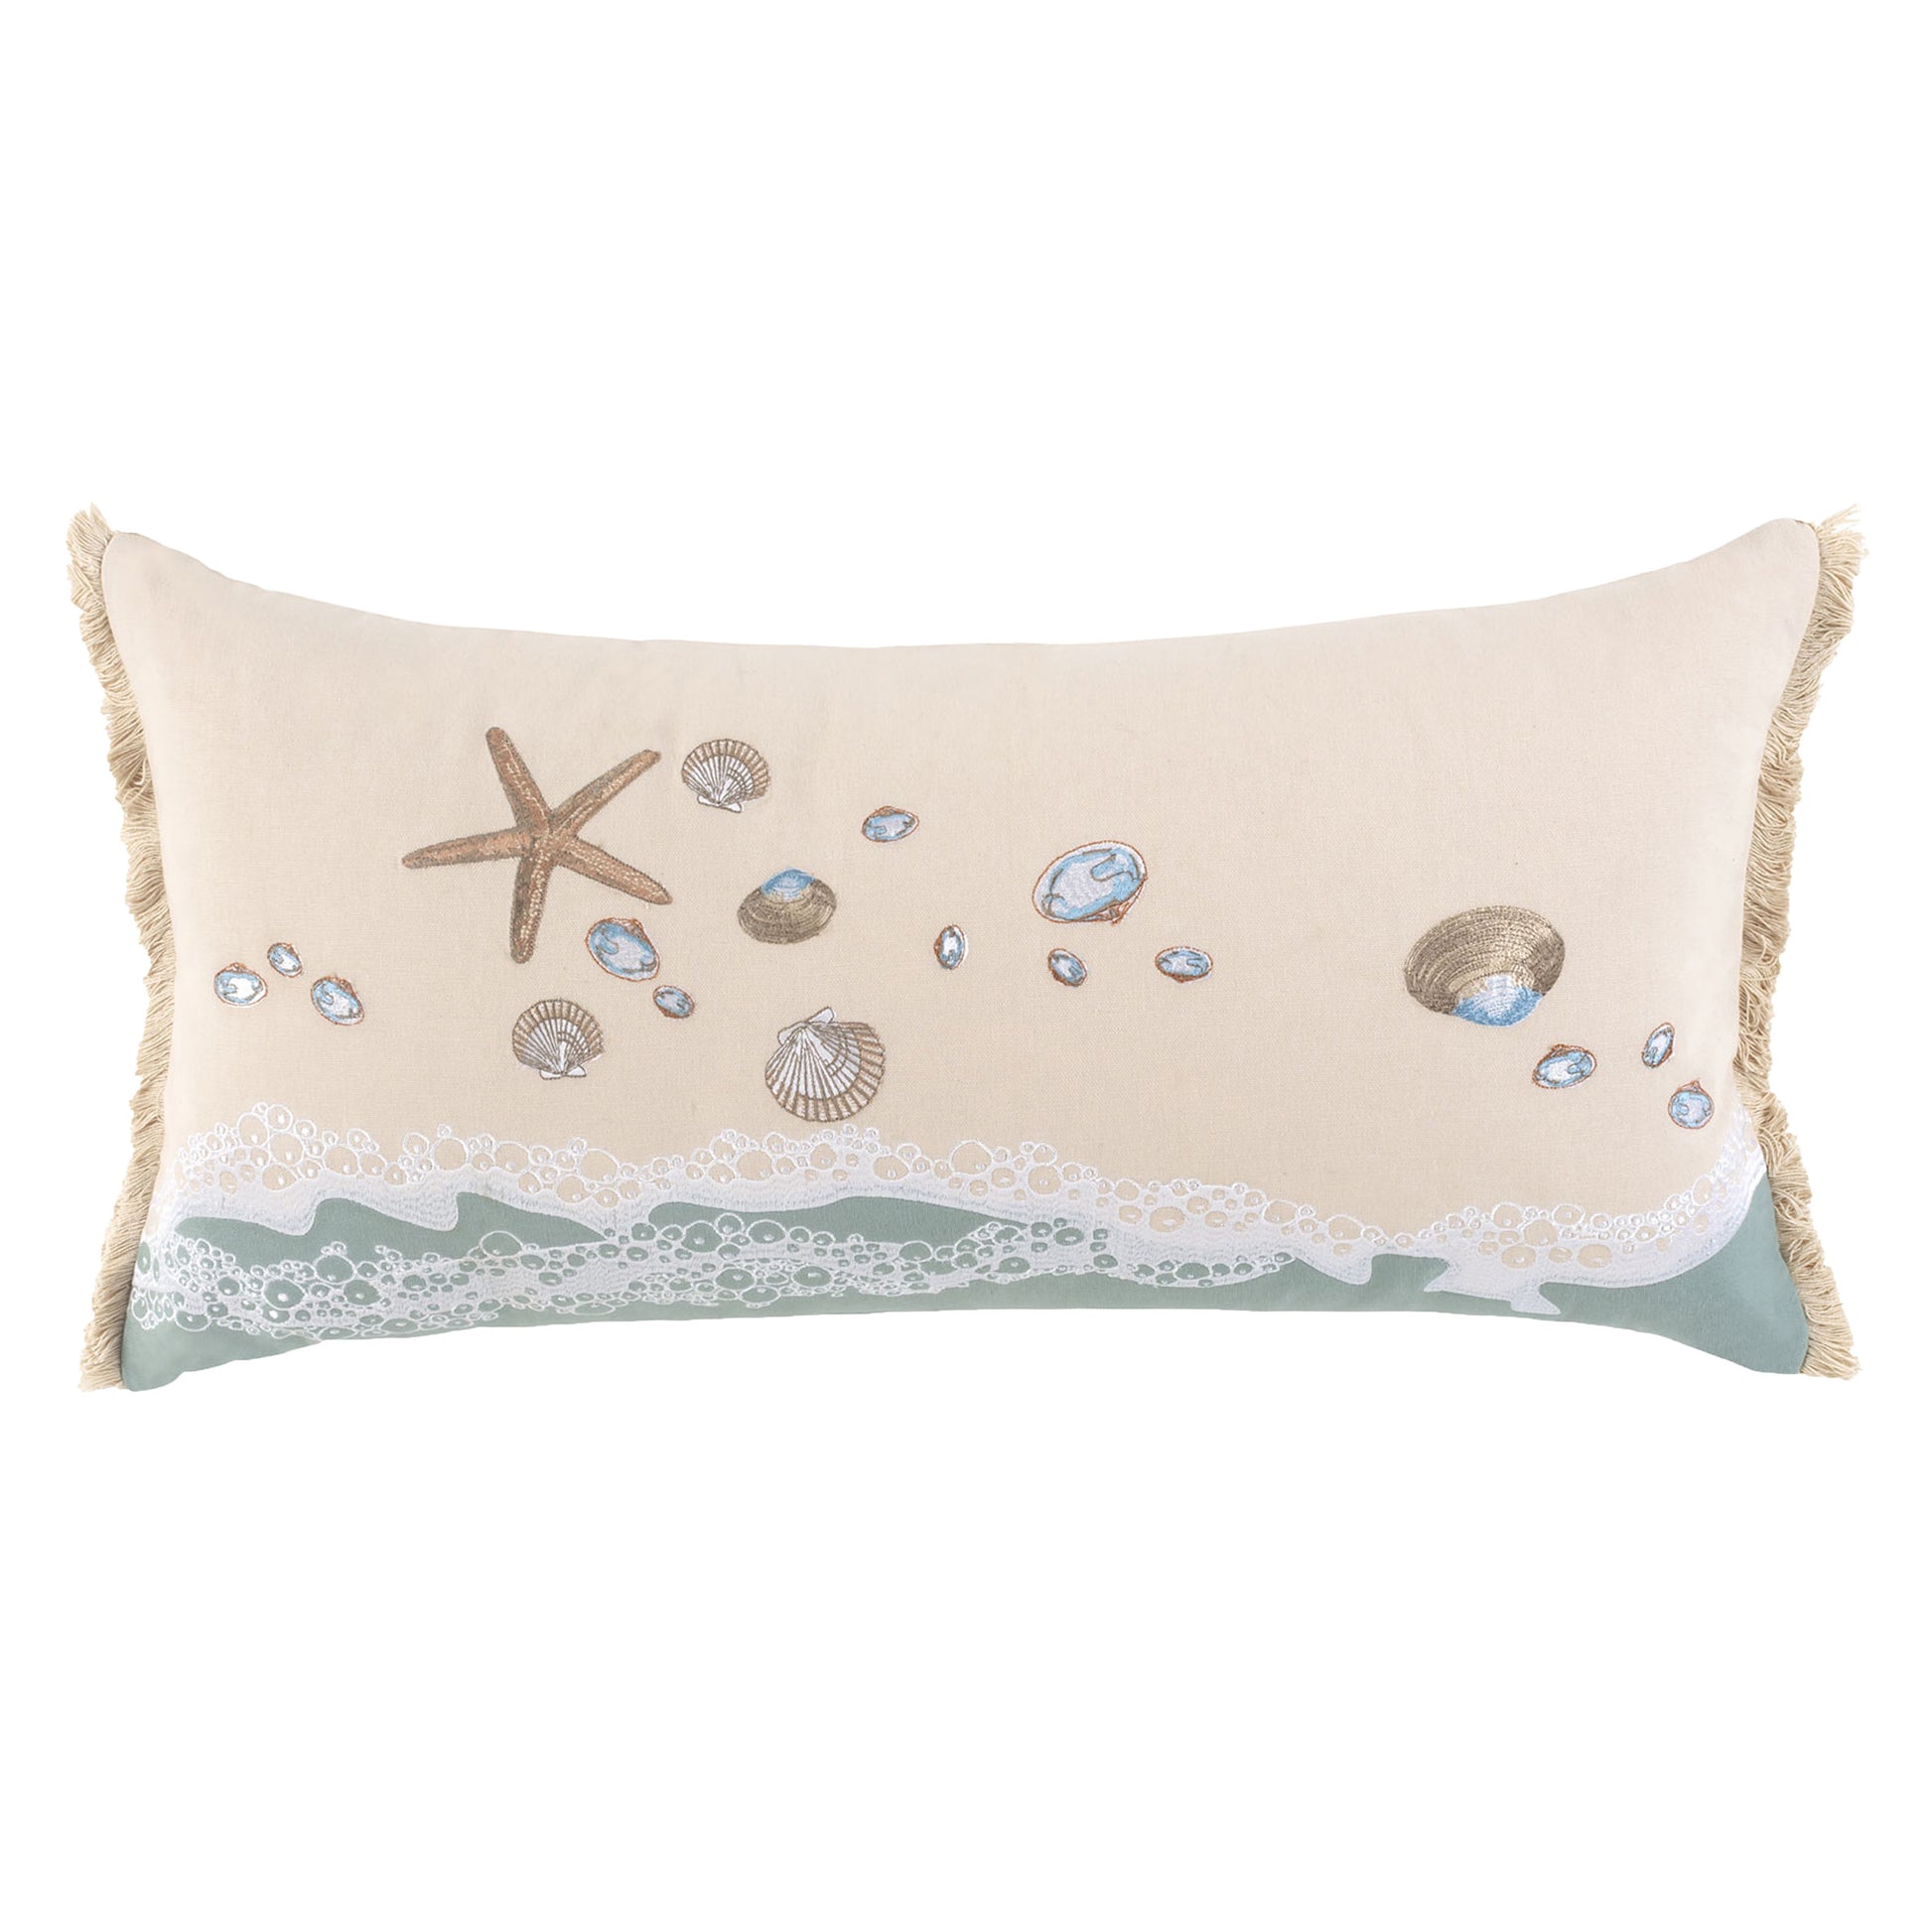 A sea star, scallop and clam shells, embroidered along the breaking shoreline. Pillow finished with fringe edges.